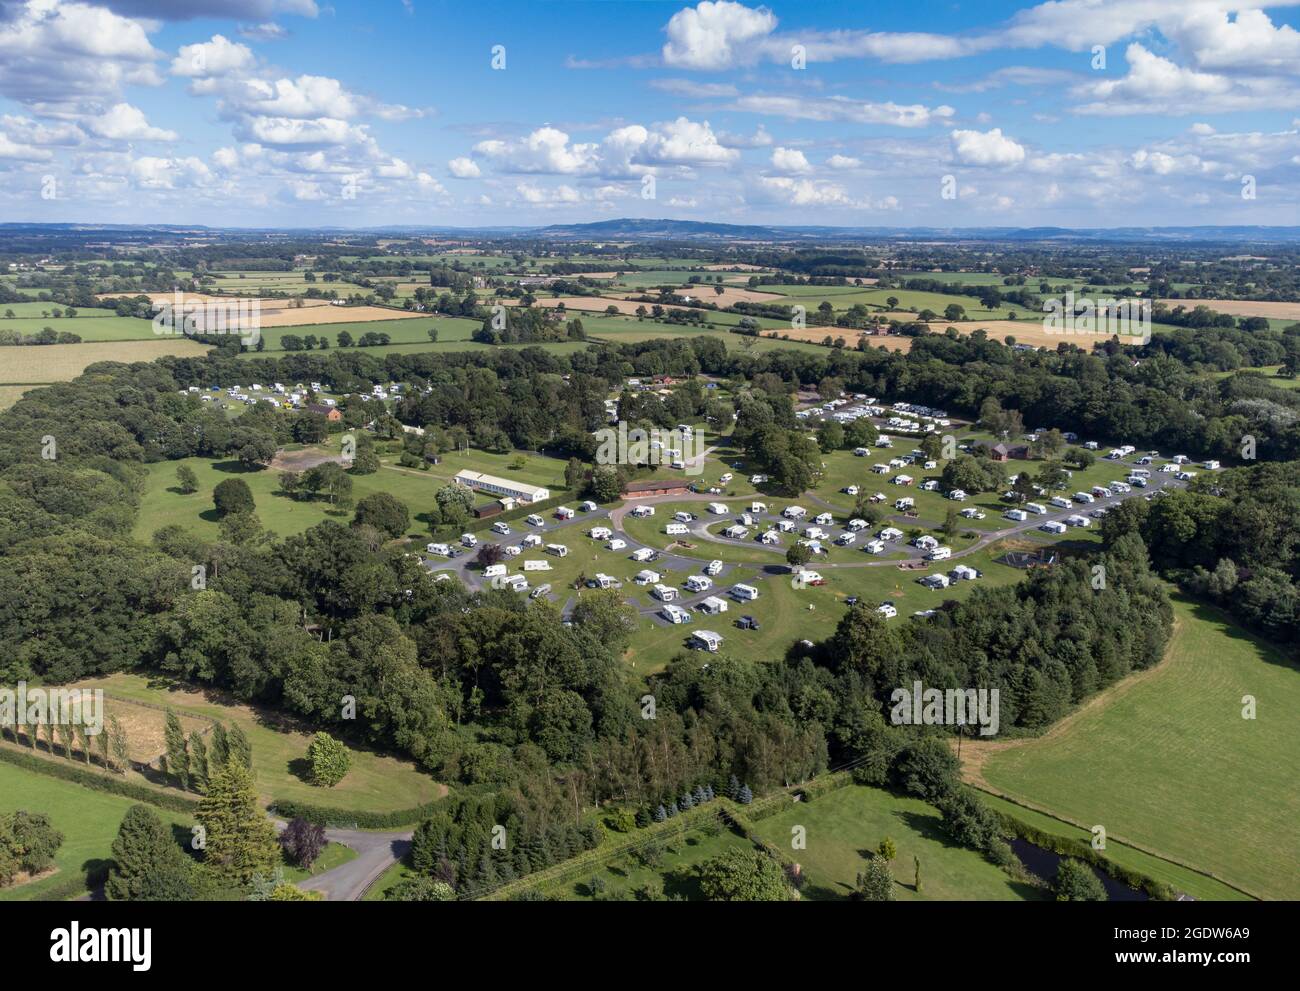 Editorial Hanley Swan, UK - August 10th, 2021: One of the many camp sites around the Great Malvern area in England, UK Stock Photo